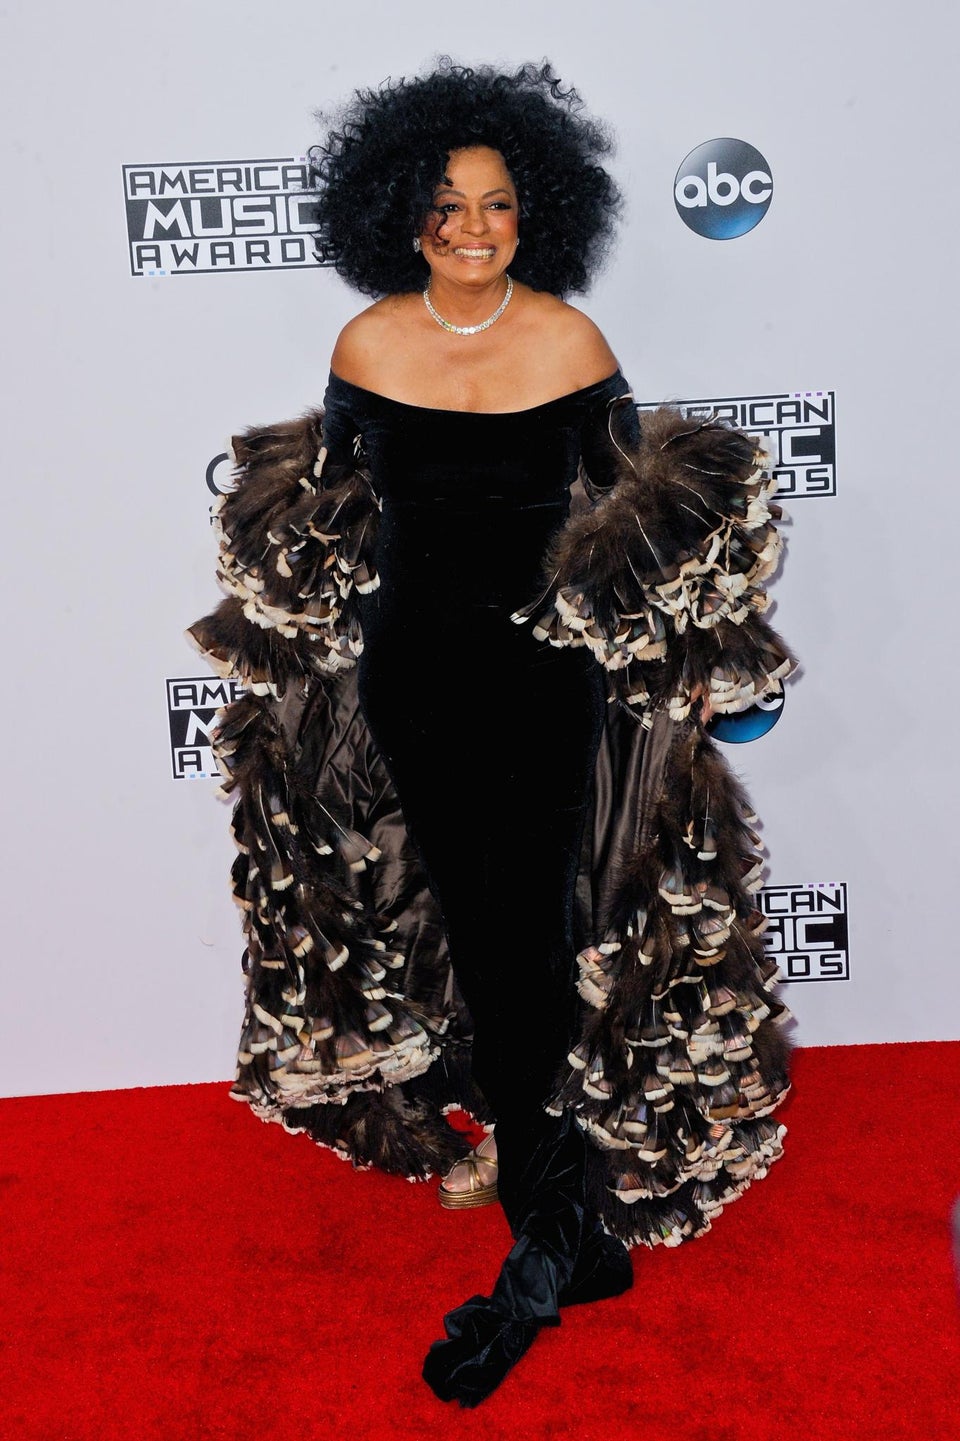 Diana Ross Says ‘the Show Must Go On’ After Car Accident